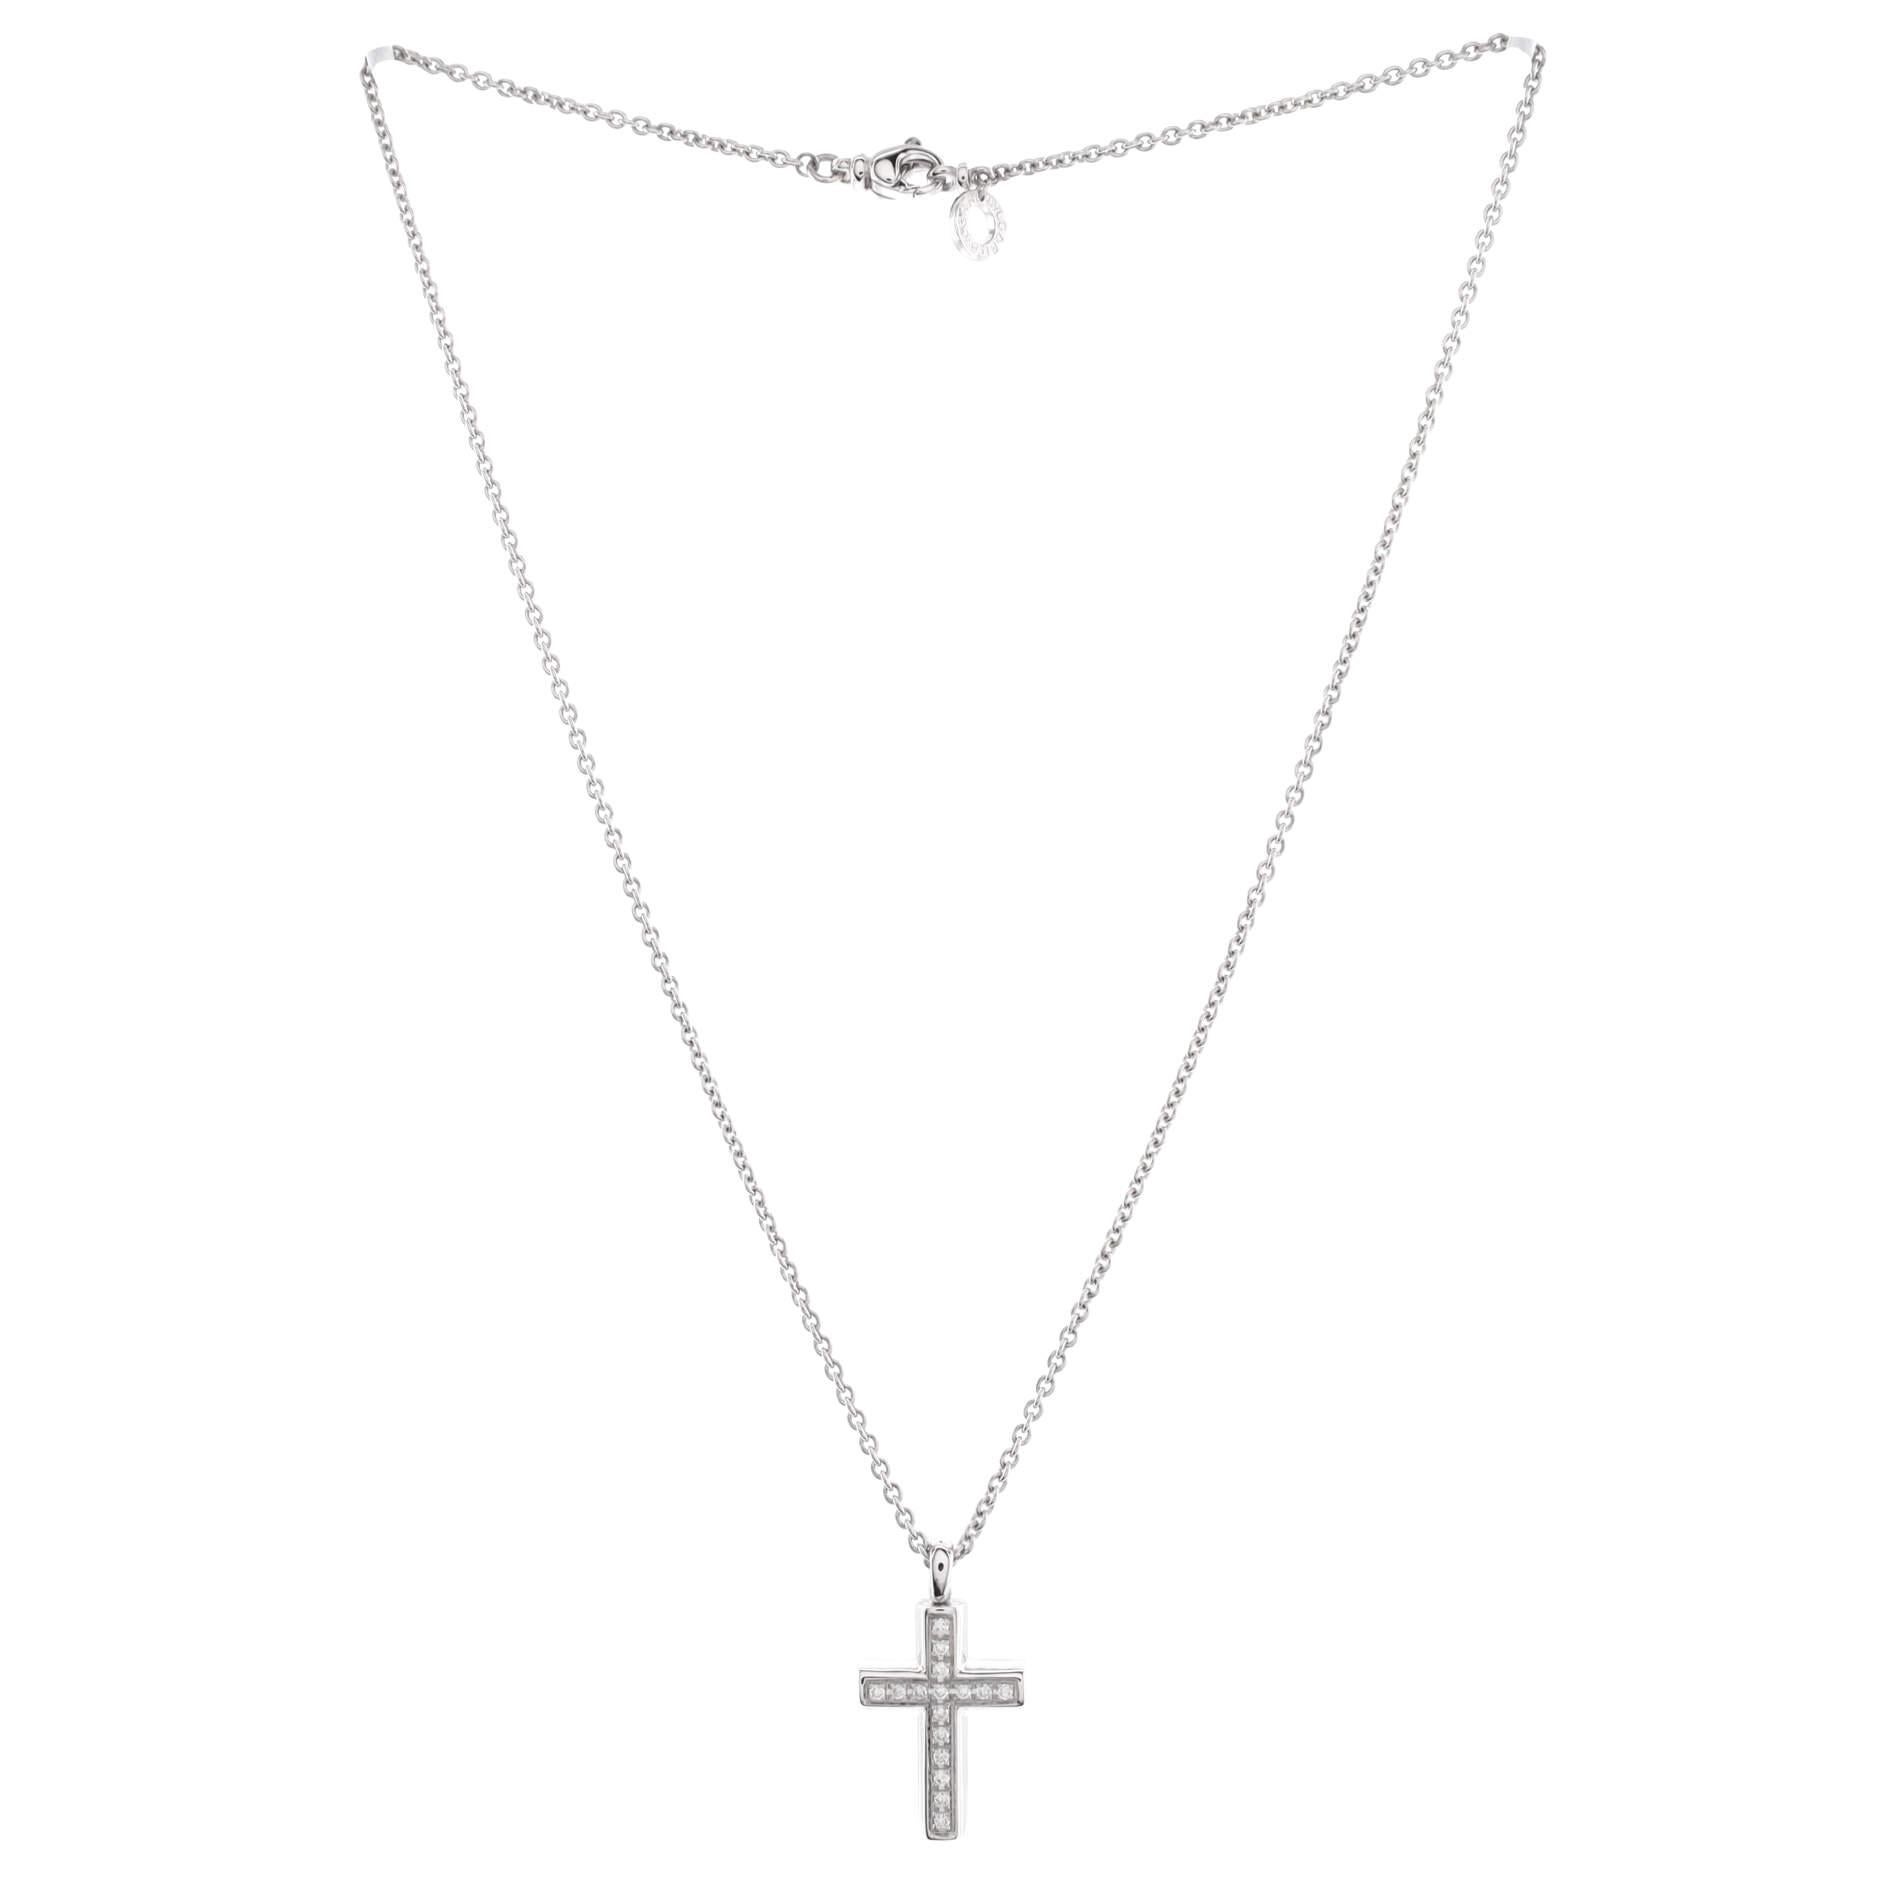 Bvlgari Latin Cross Necklace 18K White Gold and Diamonds In Good Condition For Sale In New York, NY